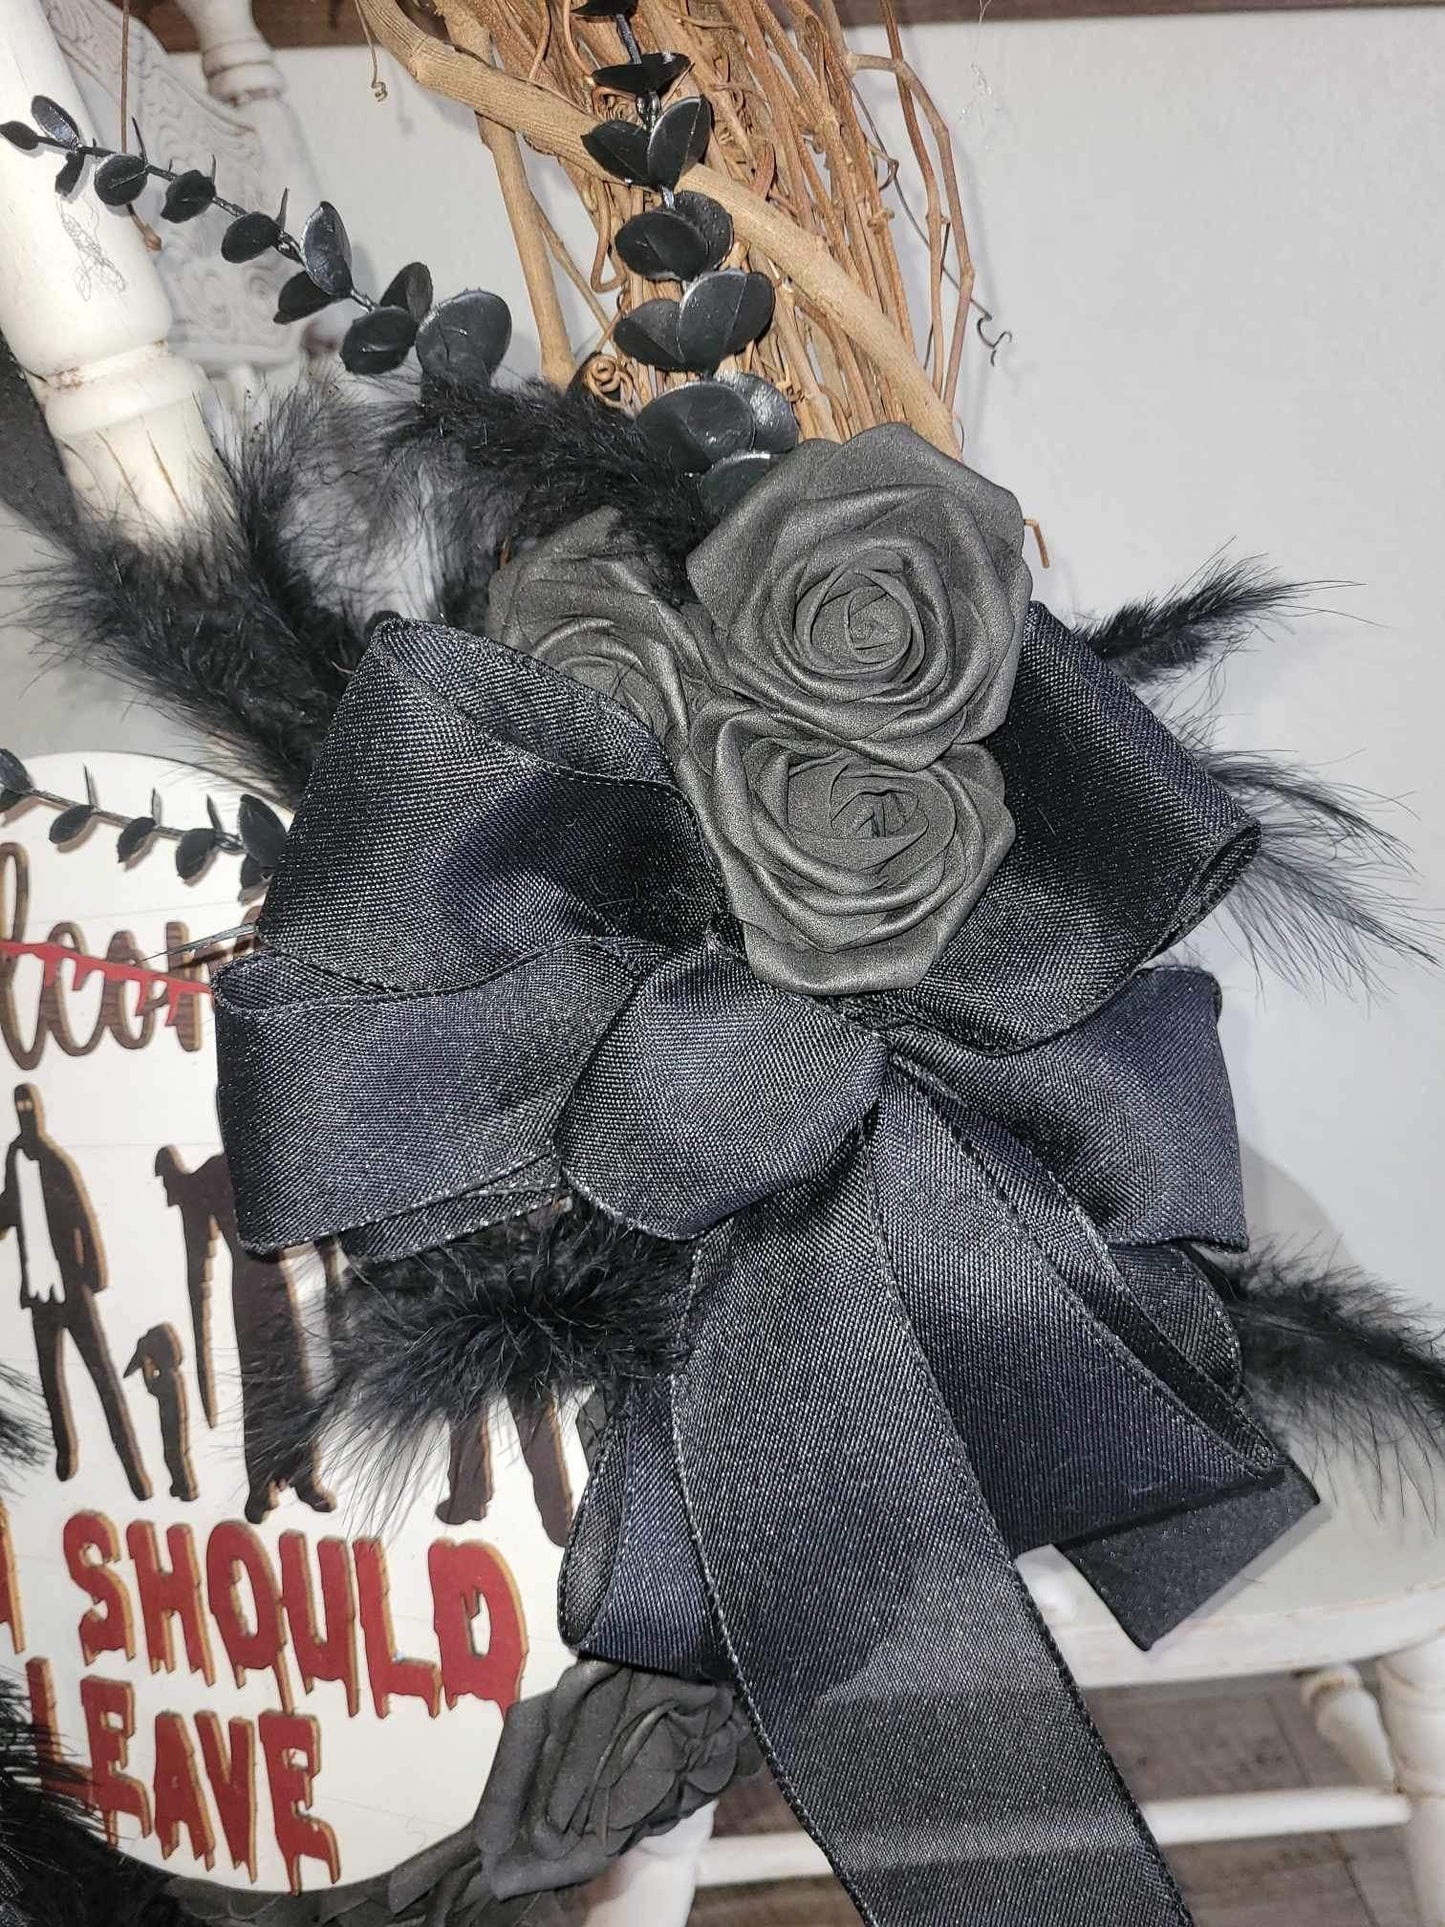 EXTRA LARGE Handmade Gothic “Welcome” wreath, Black roses, faux feathers, Unique, One of a Kind